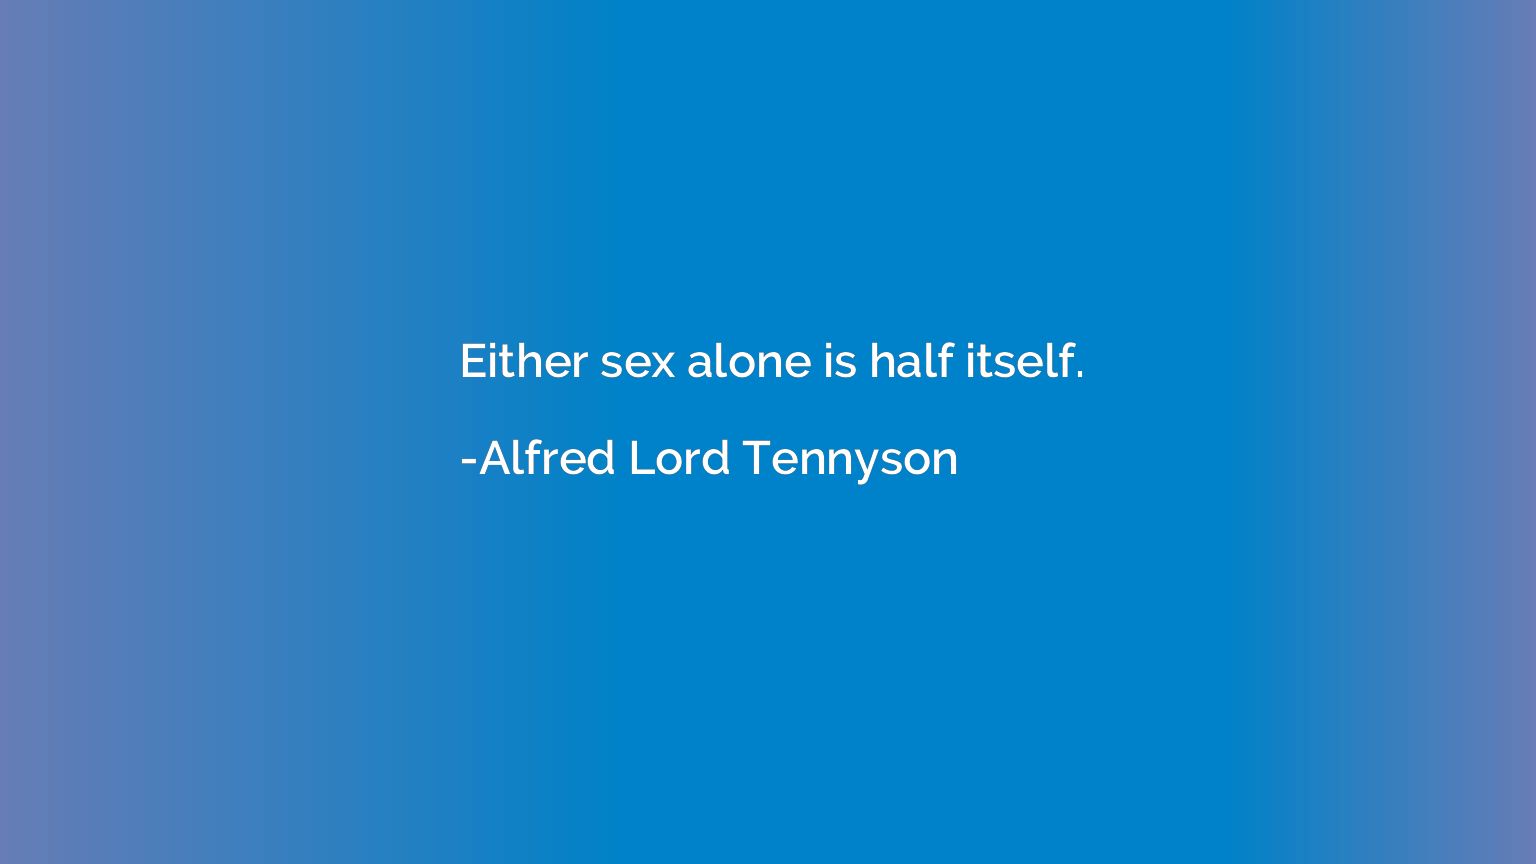 Either sex alone is half itself.